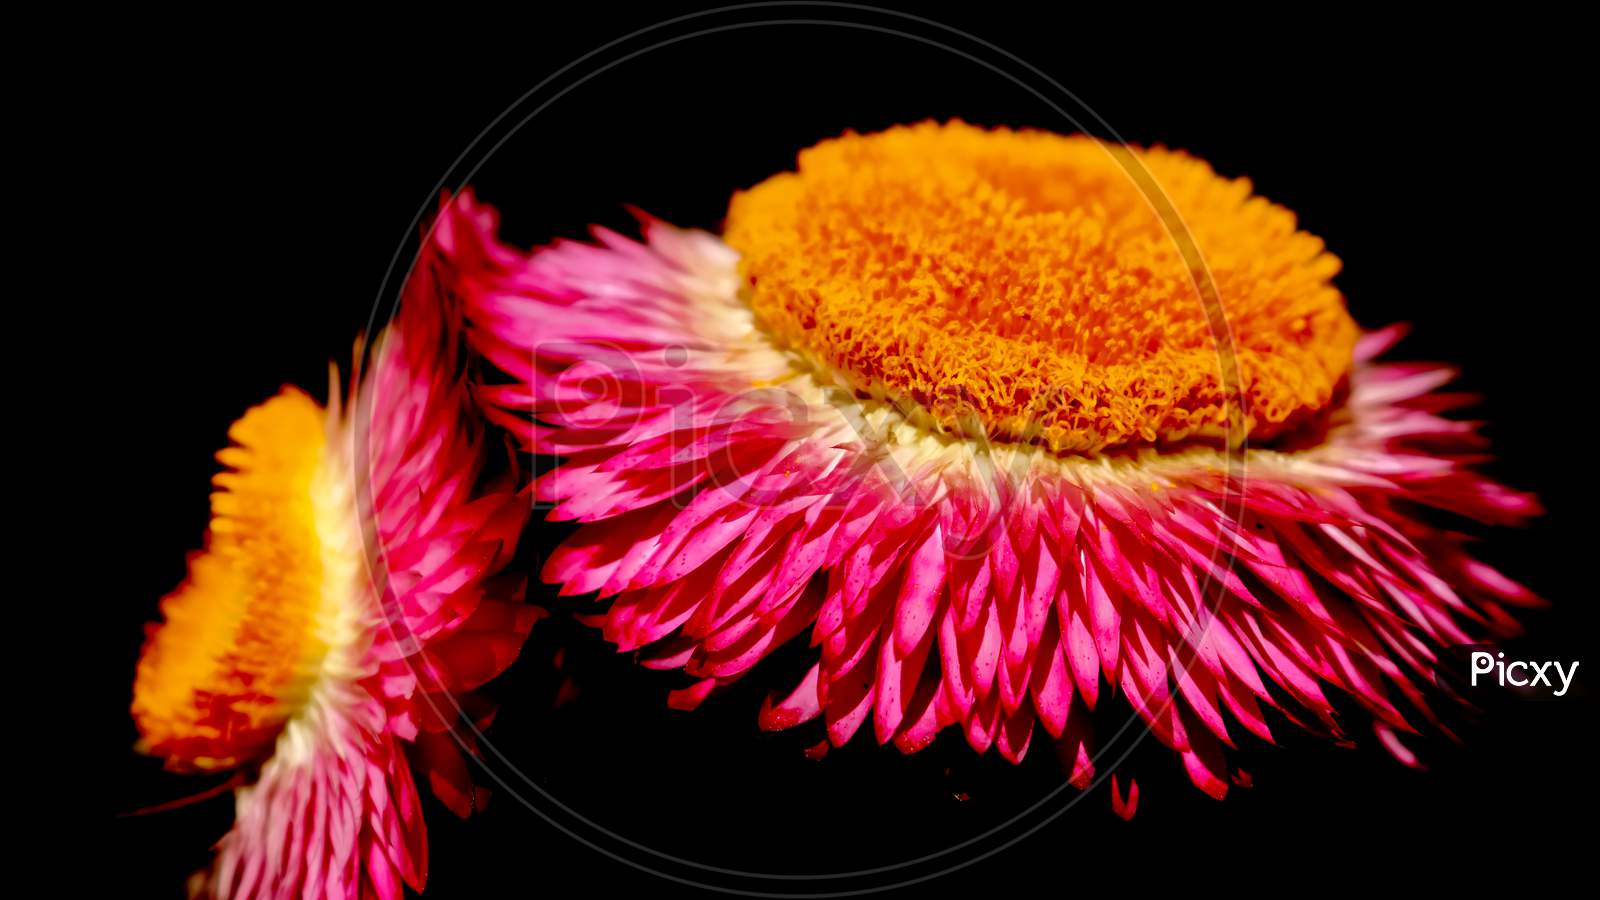 macro image of a beautiful pink flowers with yellow cone on top